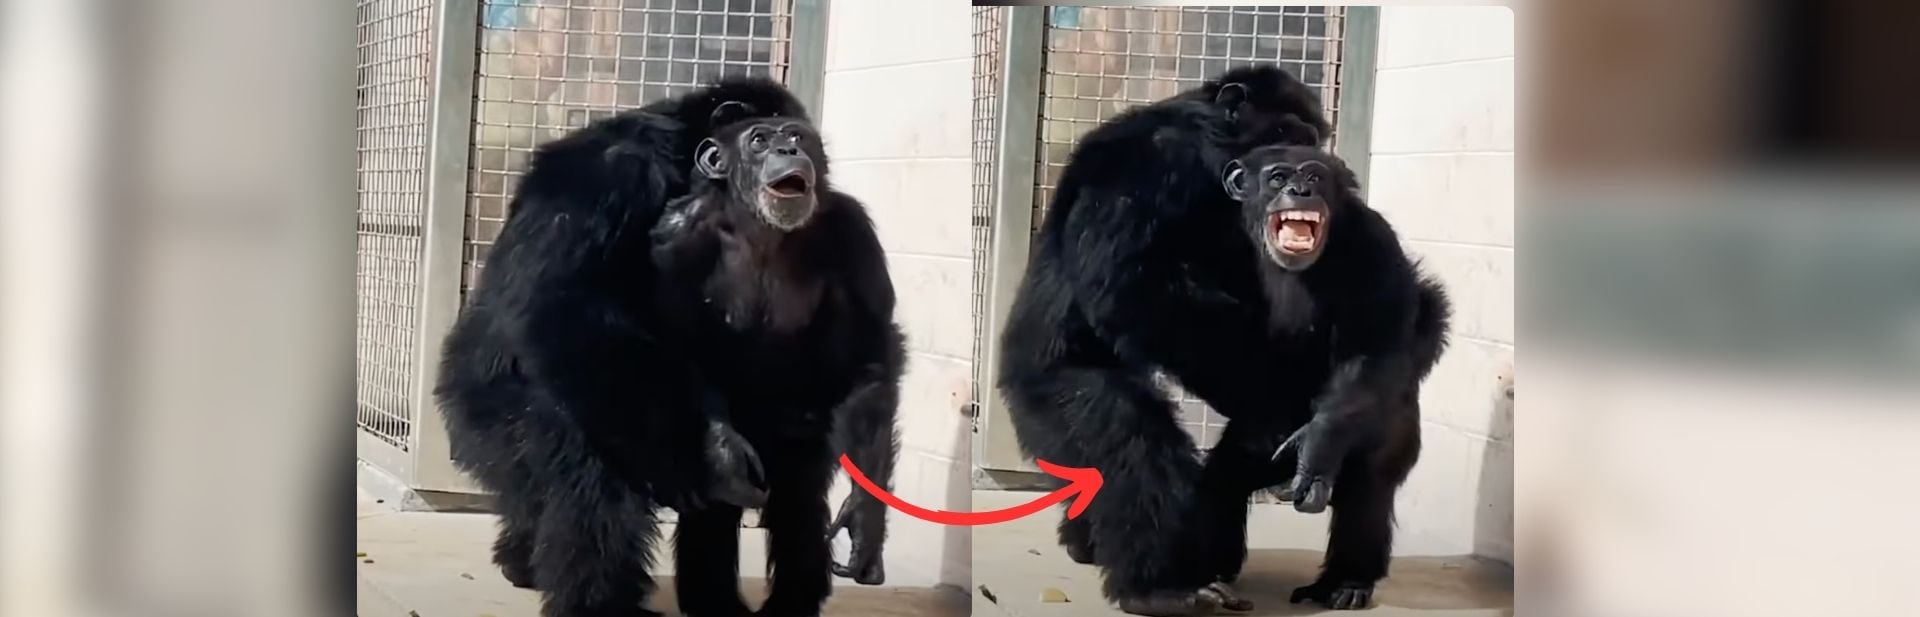 Chimp Sees Sky for the First Time – Her Reaction Will Melt Your Heart